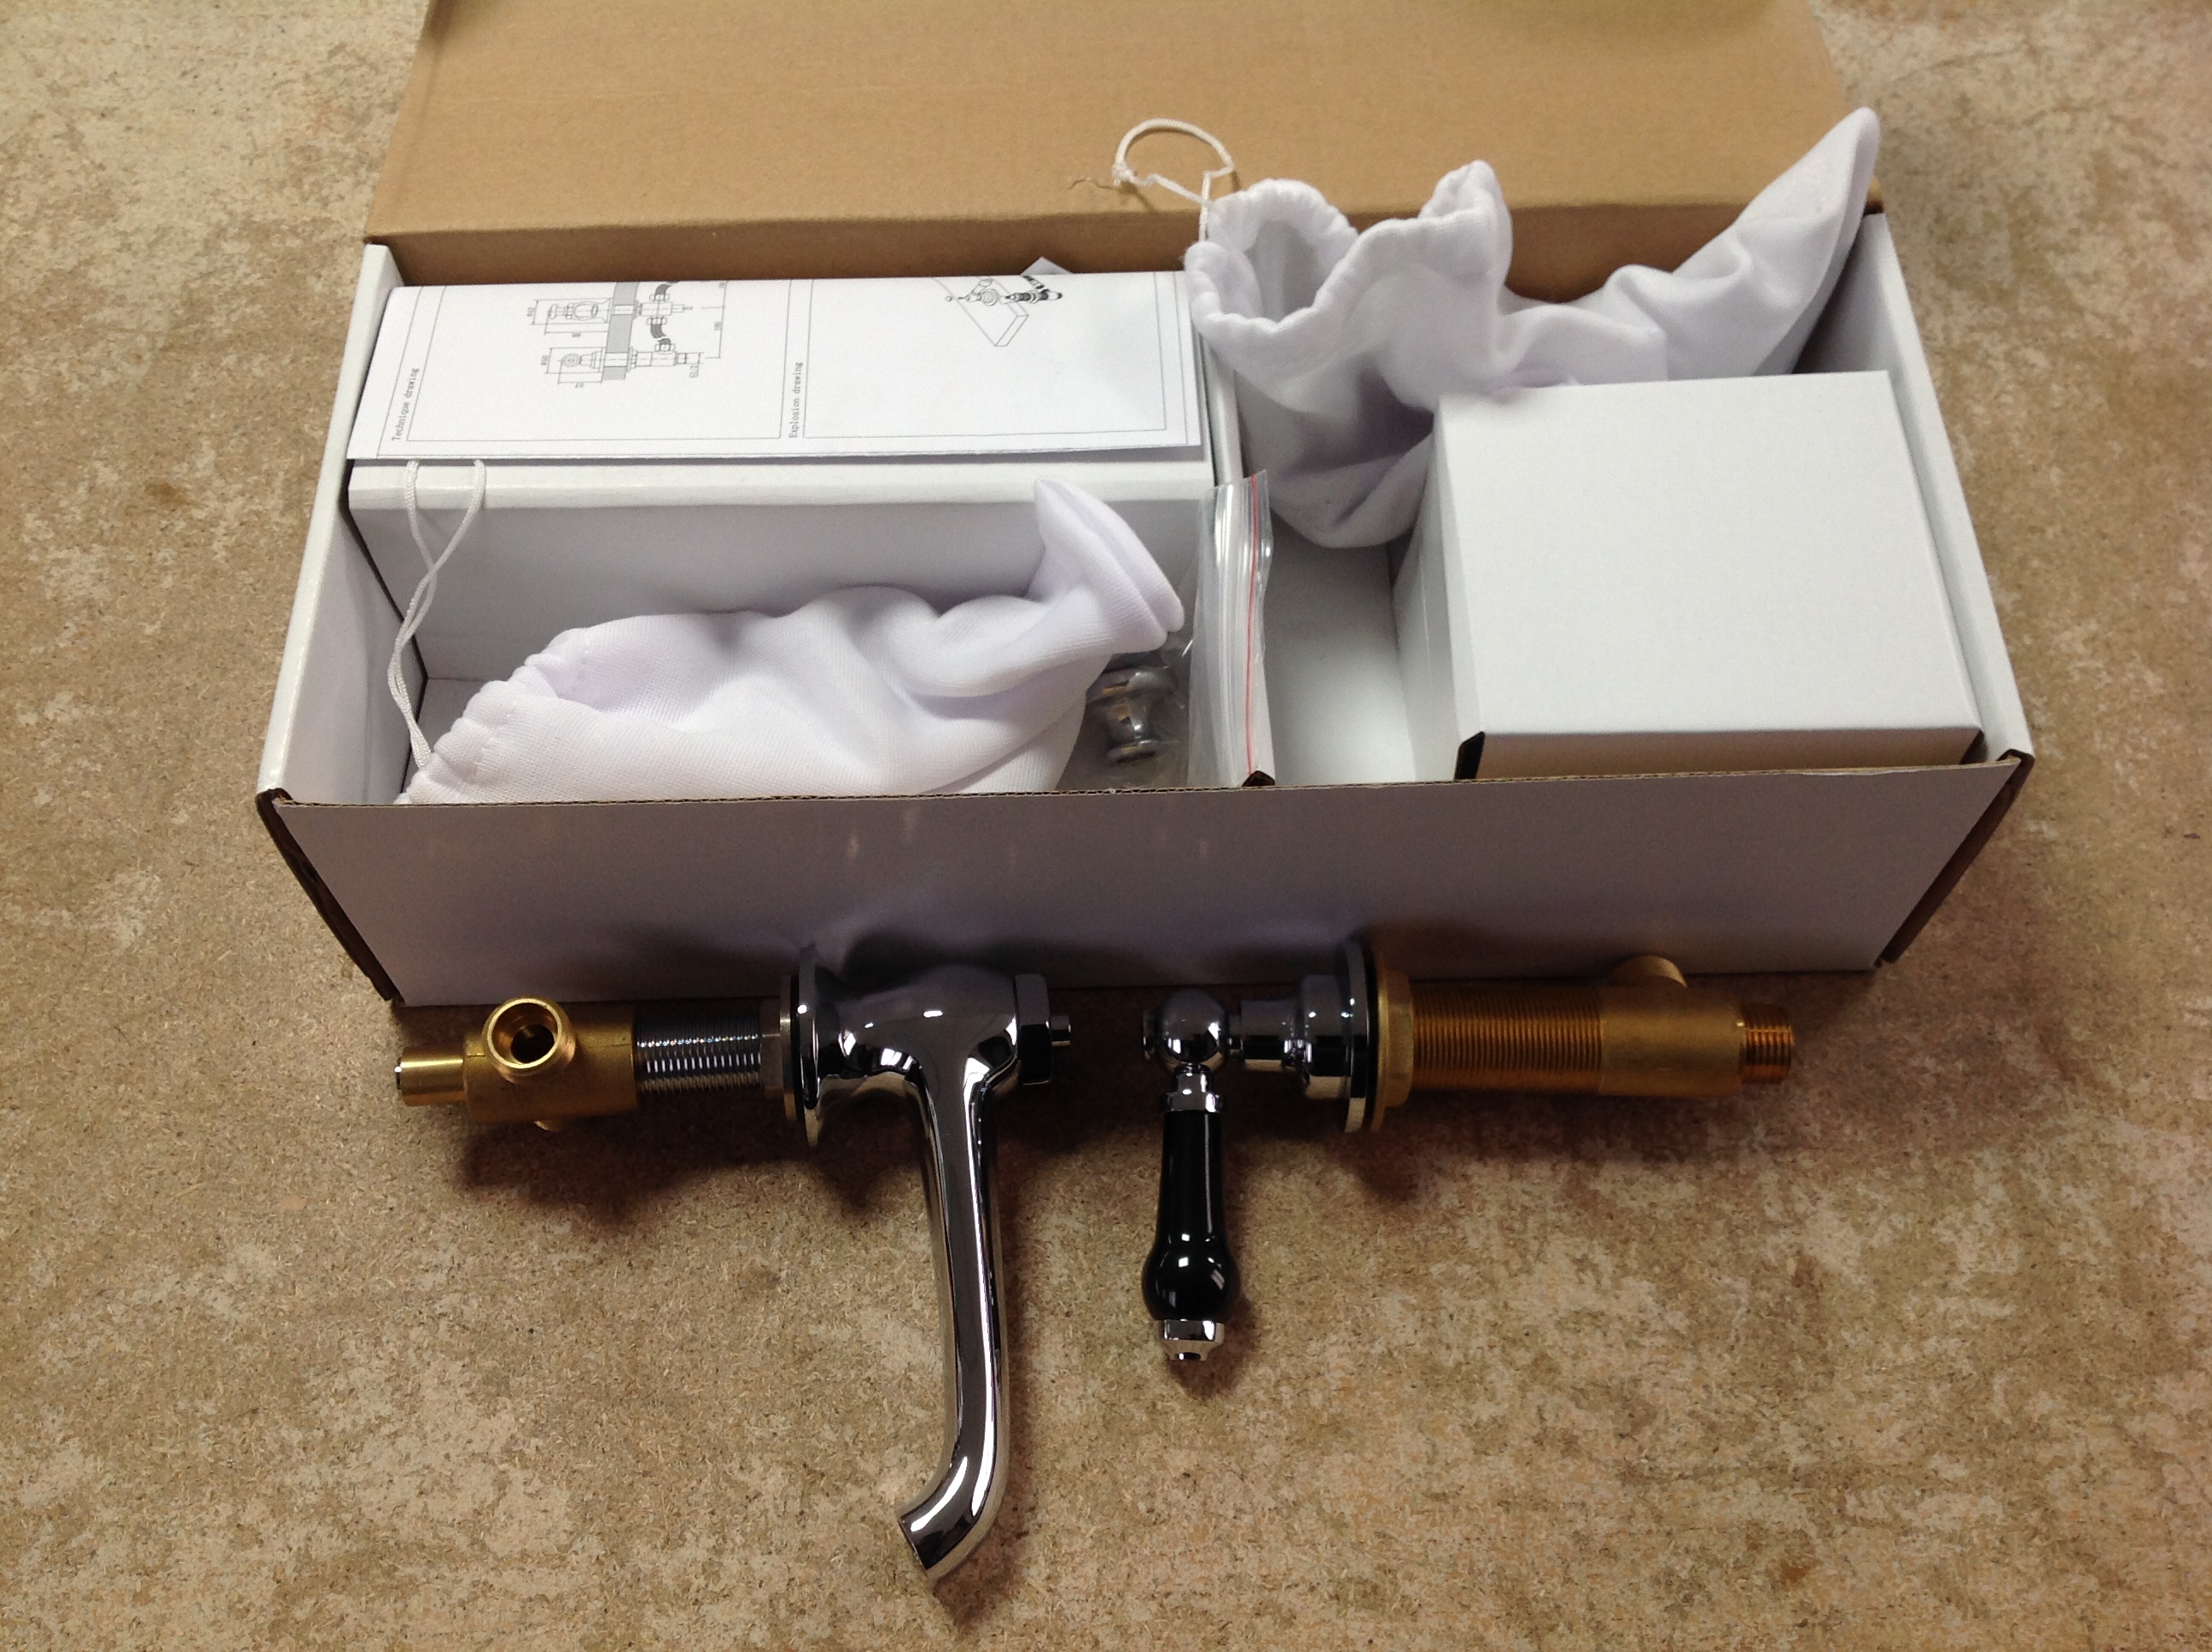 A traditional 3TH black lever basin mixer tap and pop-up waste, boxed.